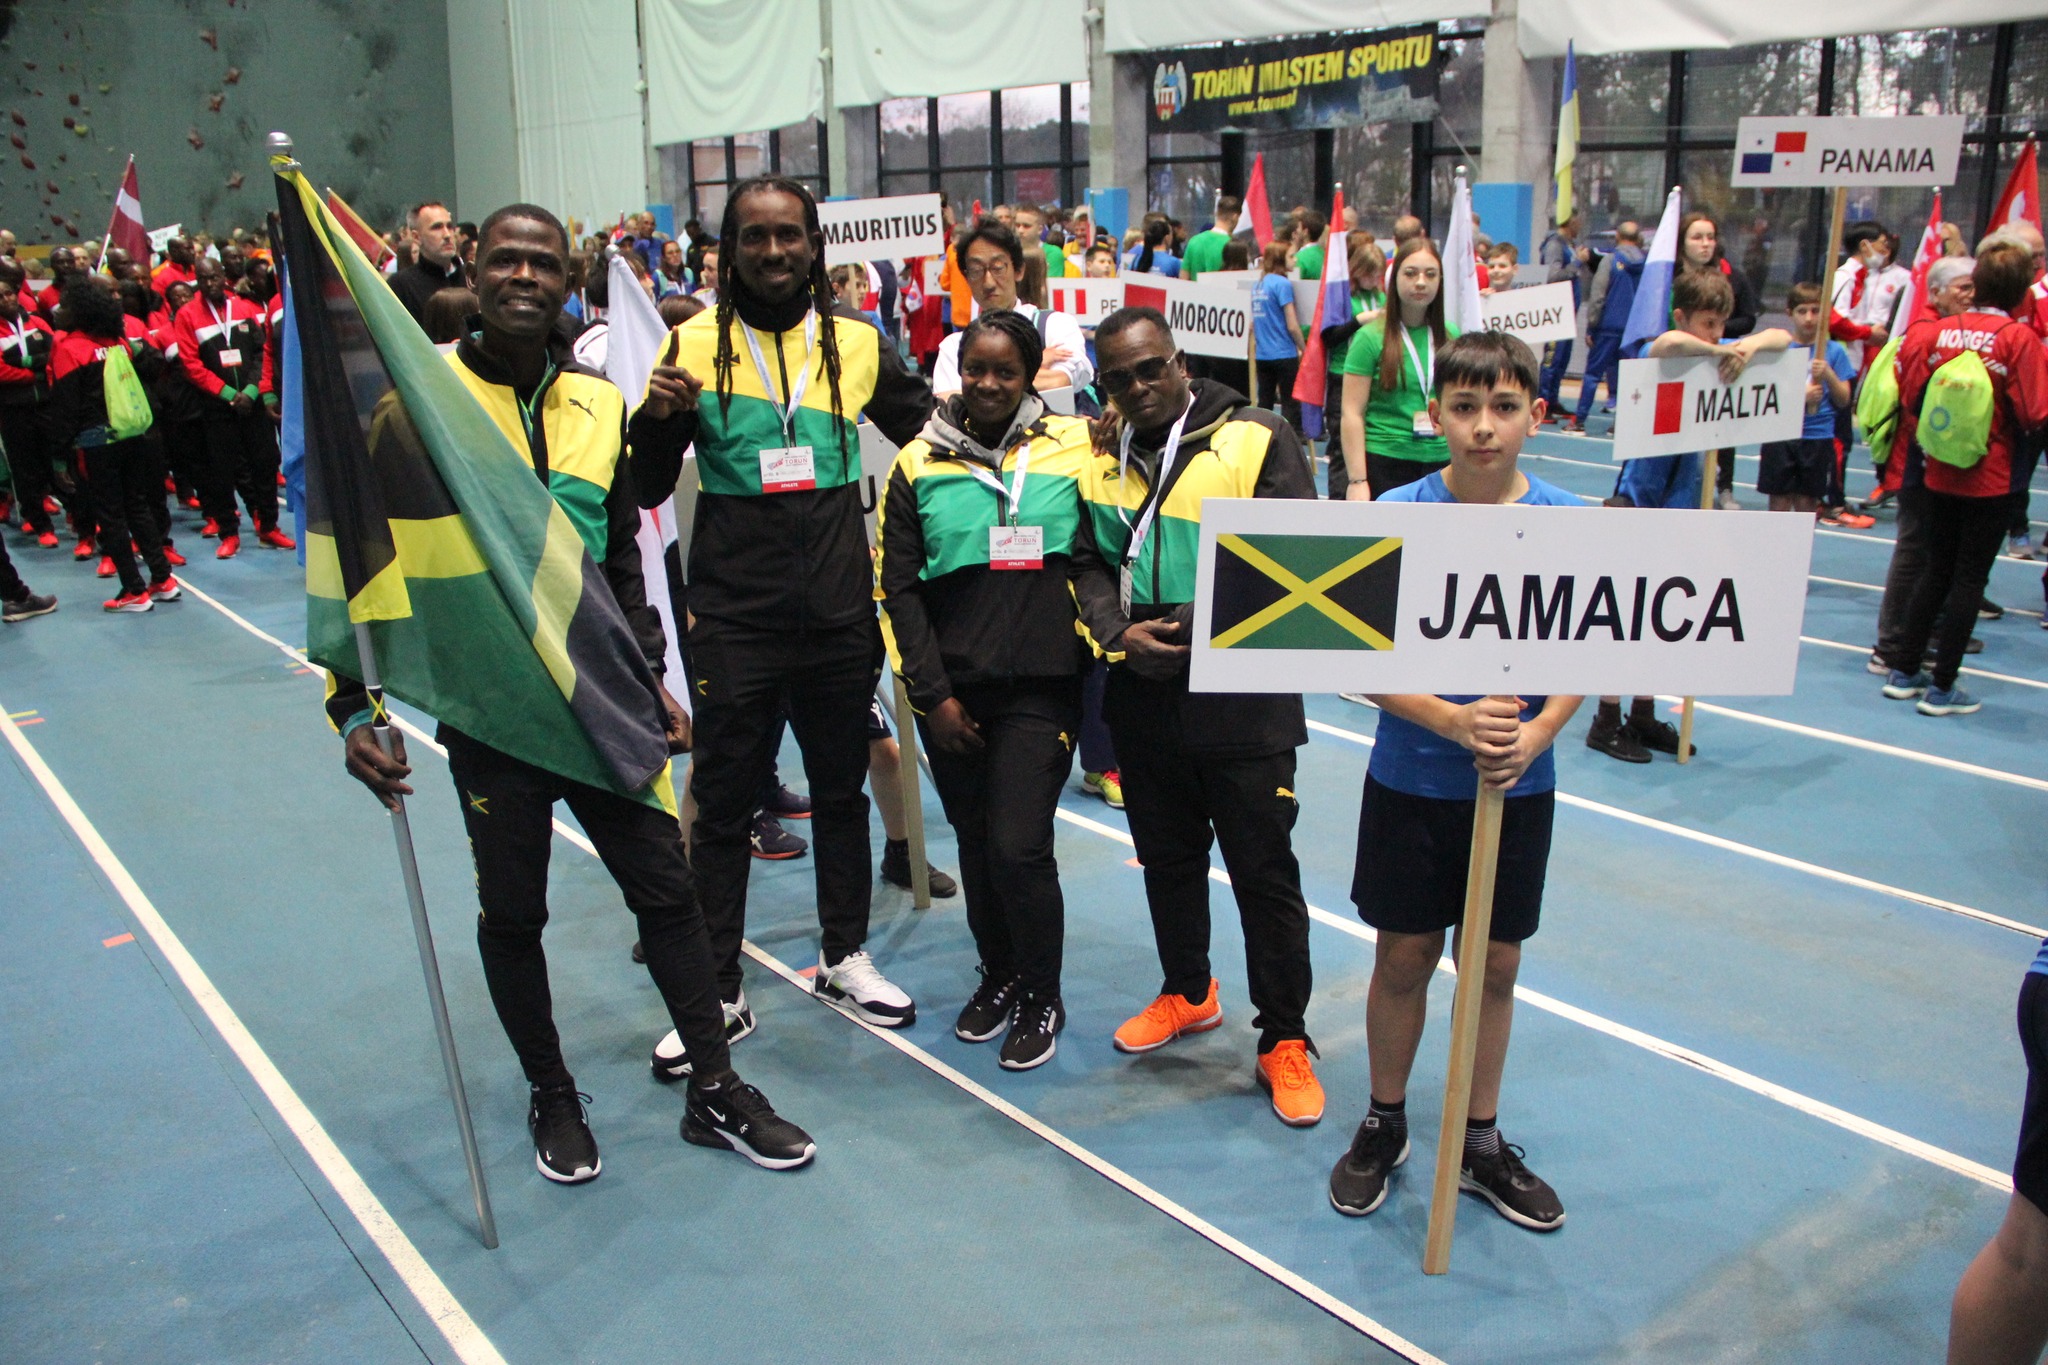 Team Jamaica ready for Opening Ceremony. Photo by Sandy Triolo.